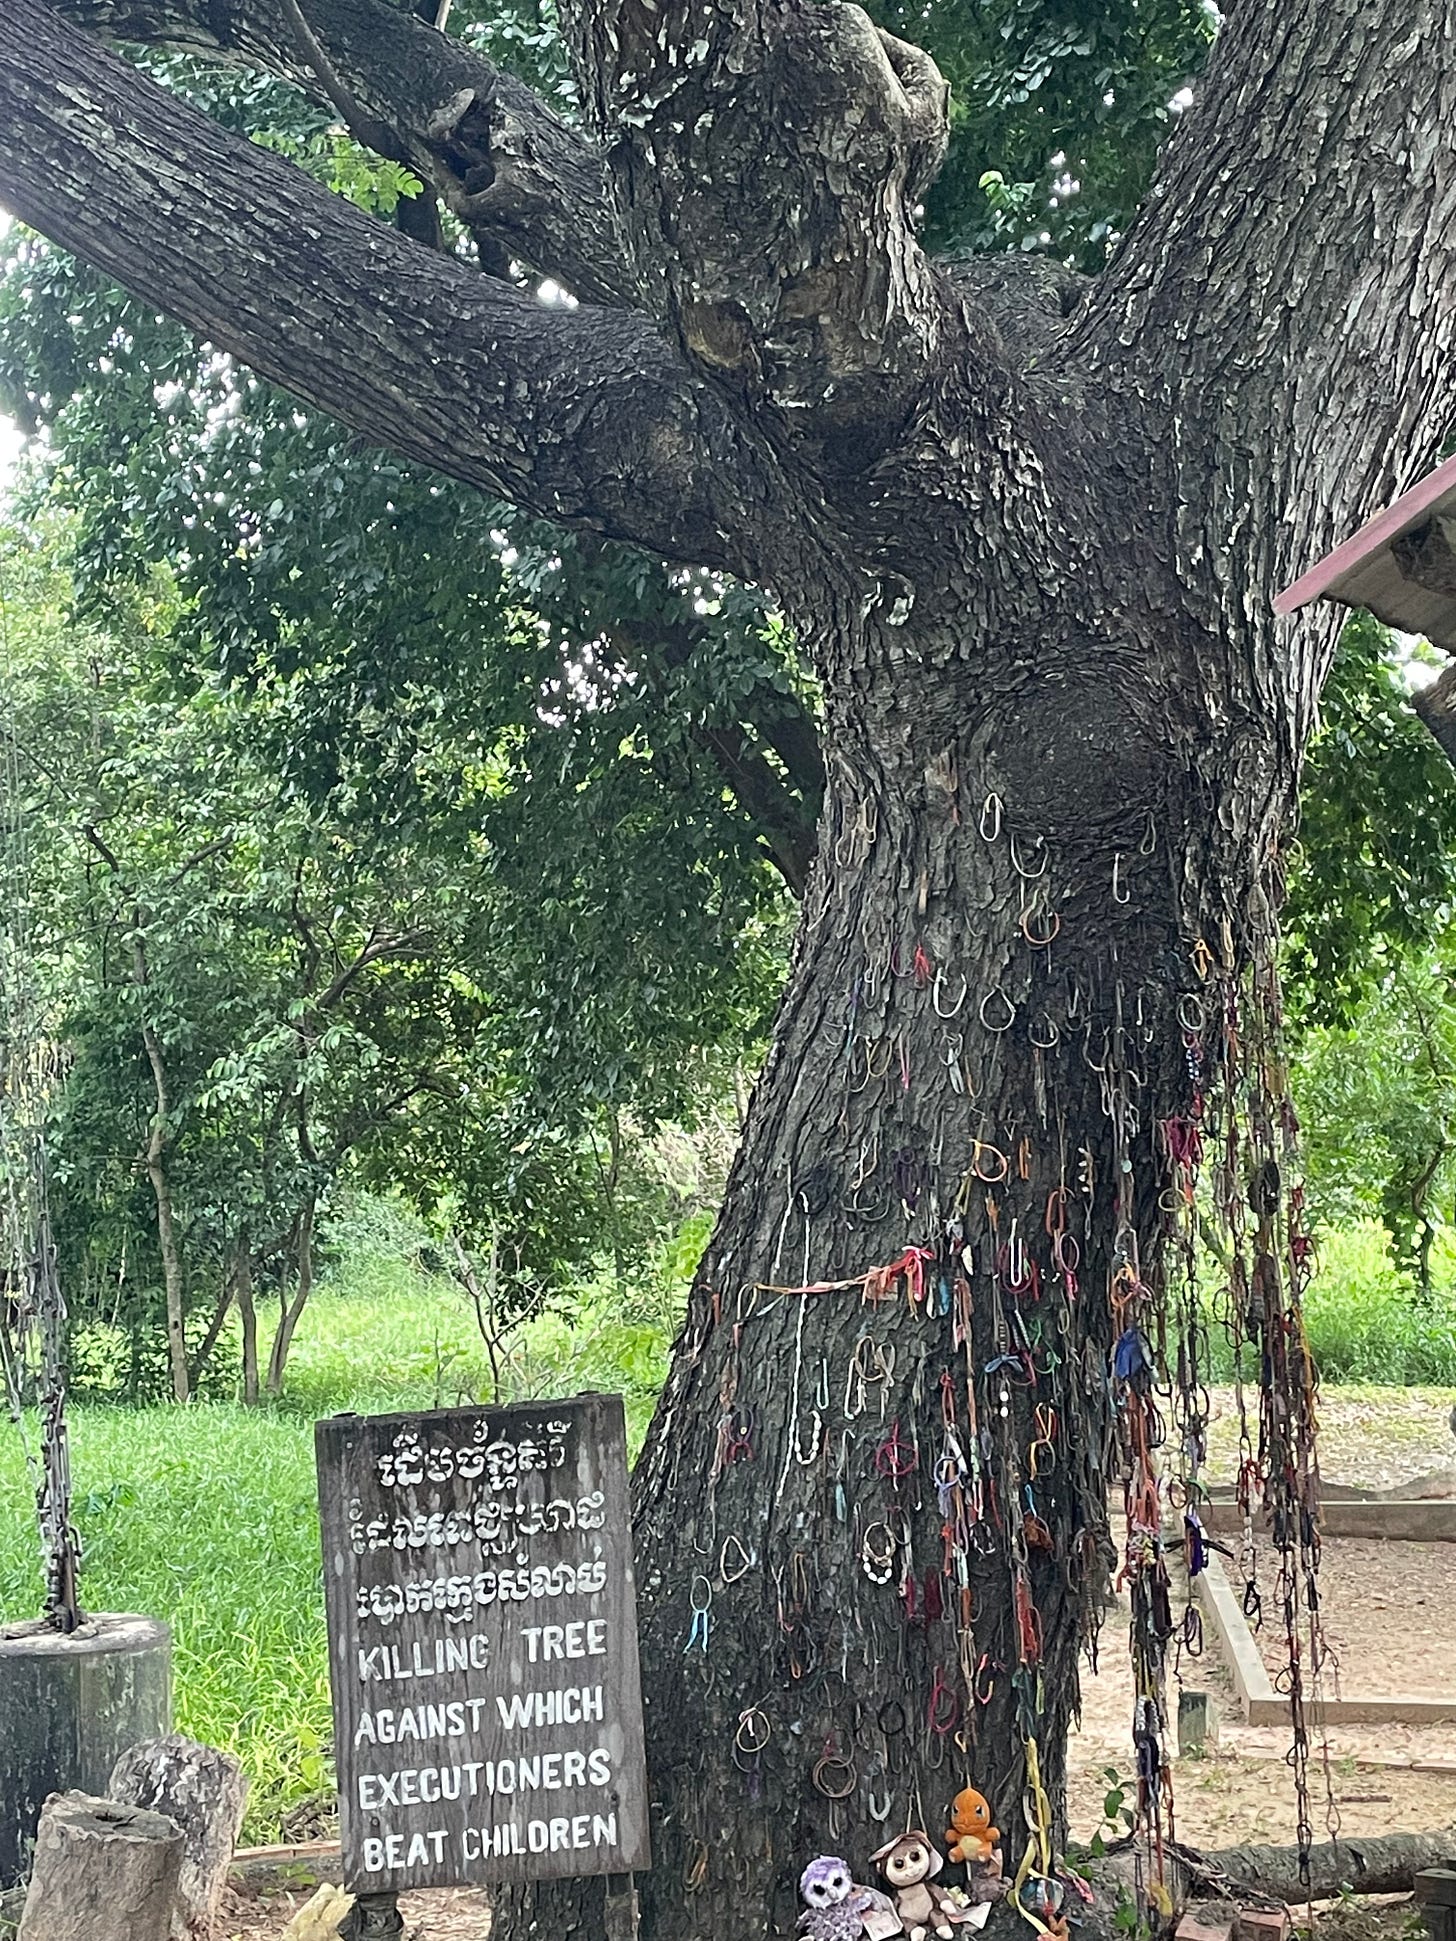 A tall tree with many bracelets hanging from its trunk. A sign at the base reads "KILLING TREE AGAINST WHICH EXECUTIONERS BEAT CHILDREN" in Khmer on top and English on bottom.